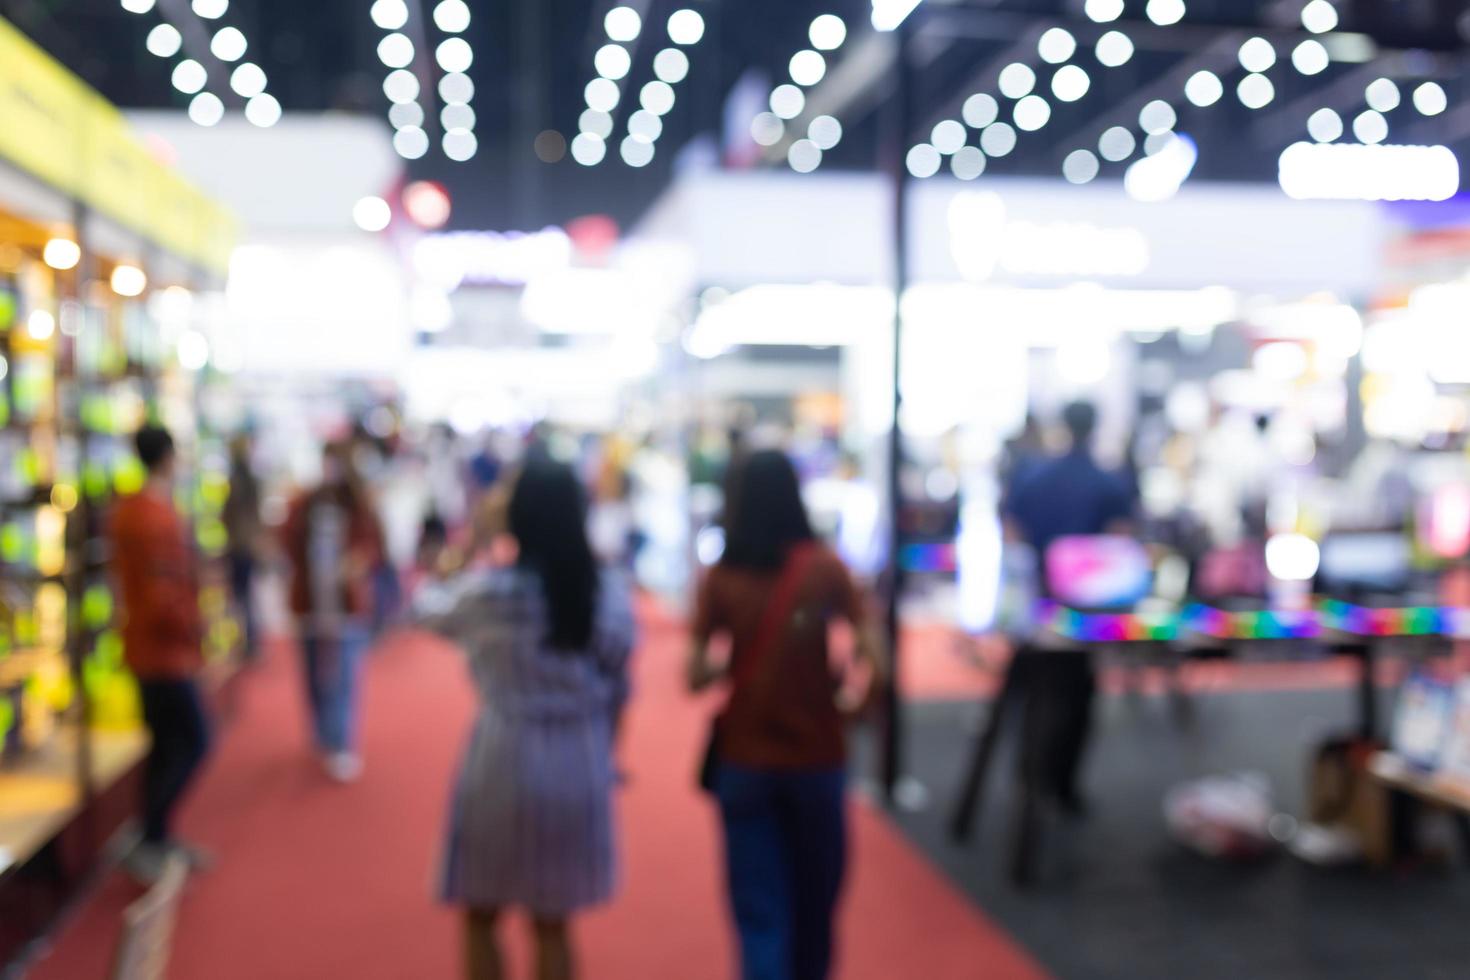 Abstract blur people in exhibition hall event trade show expo photo